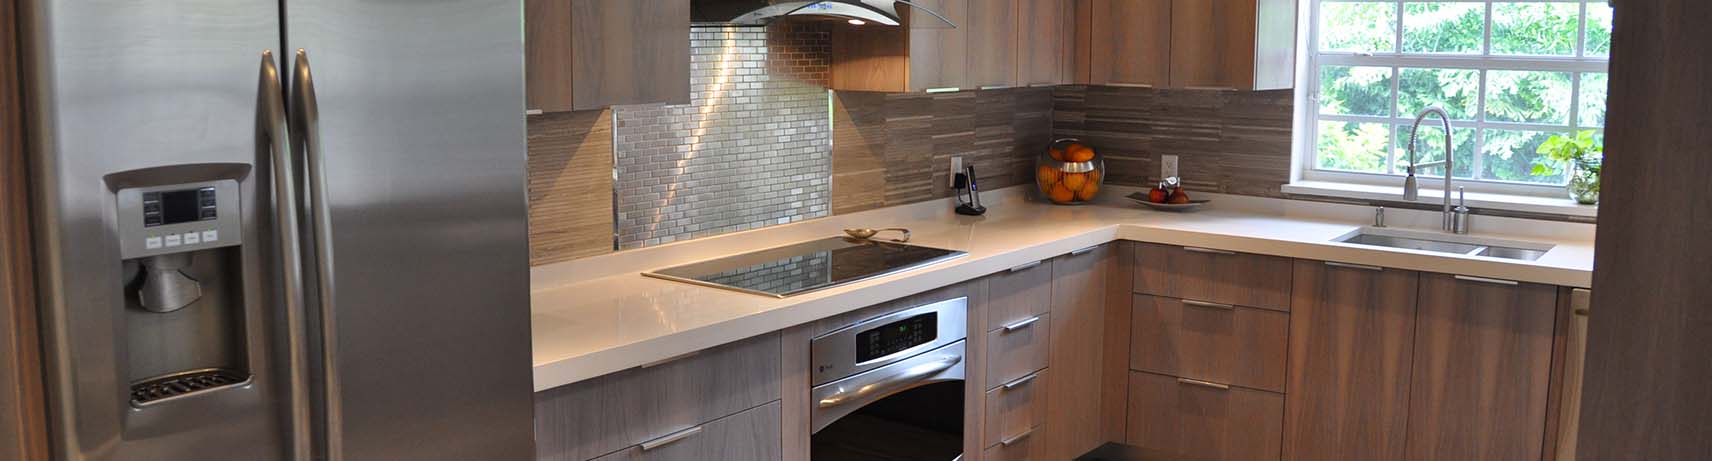 Miami General Contractor, Home Remodeling Contractor and Kitchen Remodeling Contractor